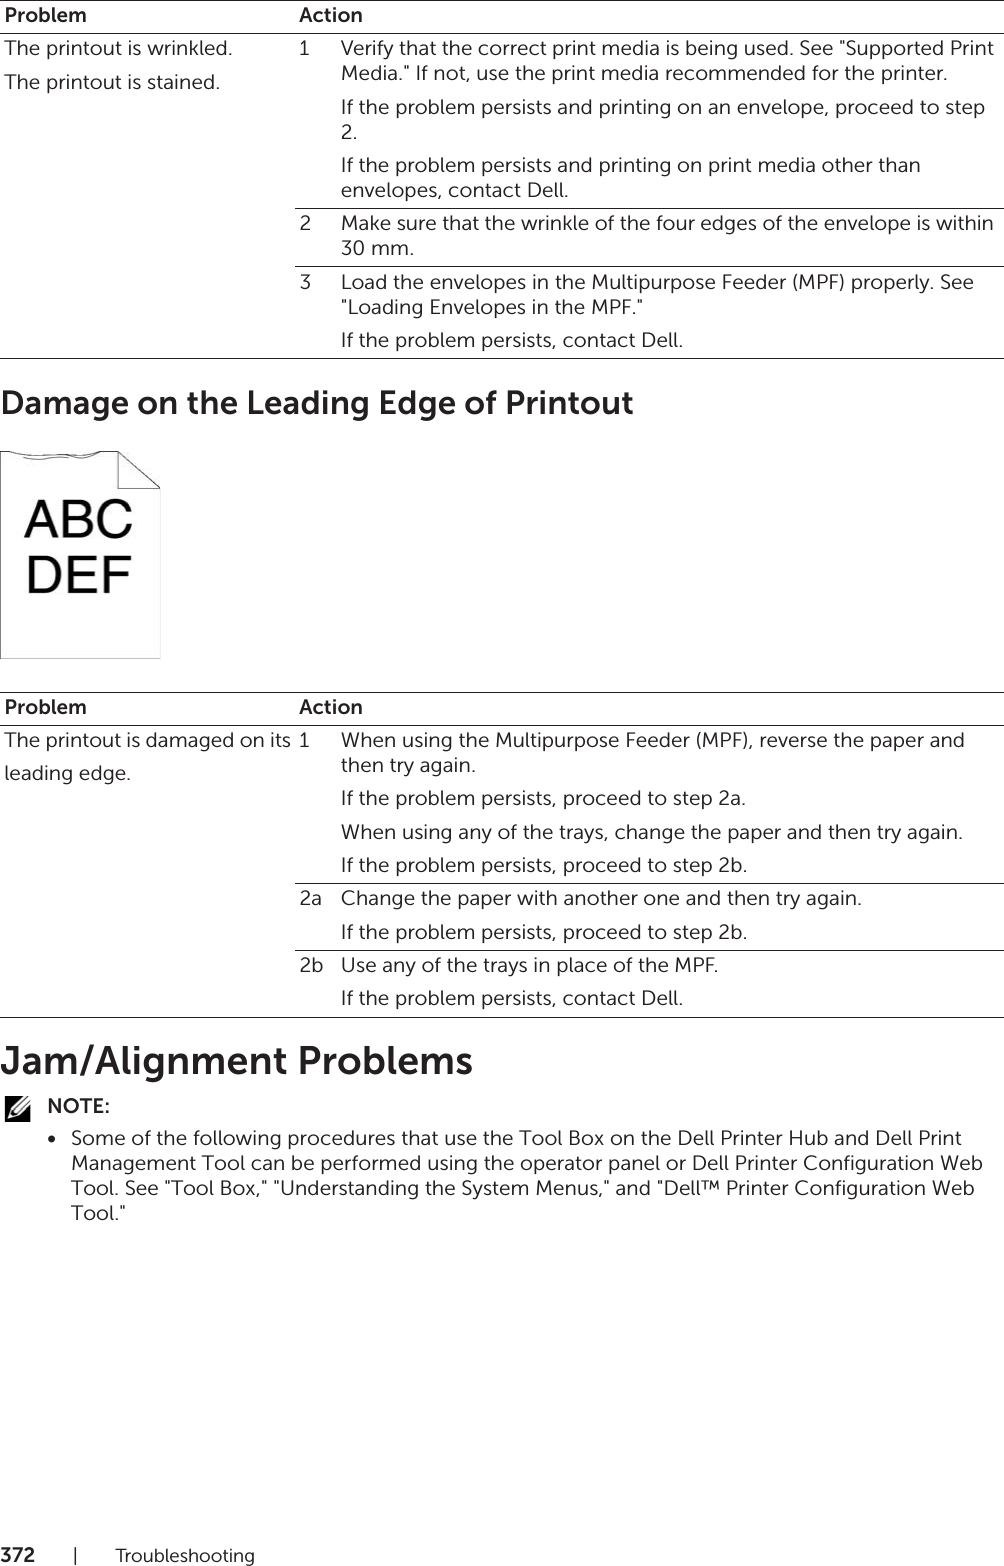 372| TroubleshootingDamage on the Leading Edge of PrintoutJam/Alignment ProblemsNOTE:•Some of the following procedures that use the Tool Box on the Dell Printer Hub and Dell Print Management Tool can be performed using the operator panel or Dell Printer Configuration Web Tool. See &quot;Tool Box,&quot; &quot;Understanding the System Menus,&quot; and &quot;Dell™ Printer Configuration Web Tool.&quot;Problem ActionThe printout is wrinkled.The printout is stained.1 Verify that the correct print media is being used. See &quot;Supported Print Media.&quot; If not, use the print media recommended for the printer.If the problem persists and printing on an envelope, proceed to step 2.If the problem persists and printing on print media other than envelopes, contact Dell.2 Make sure that the wrinkle of the four edges of the envelope is within 30 mm.3 Load the envelopes in the Multipurpose Feeder (MPF) properly. See &quot;Loading Envelopes in the MPF.&quot;If the problem persists, contact Dell.Problem ActionThe printout is damaged on itsleading edge.1 When using the Multipurpose Feeder (MPF), reverse the paper and then try again.If the problem persists, proceed to step 2a.When using any of the trays, change the paper and then try again.If the problem persists, proceed to step 2b.2a Change the paper with another one and then try again.If the problem persists, proceed to step 2b.2b Use any of the trays in place of the MPF.If the problem persists, contact Dell.